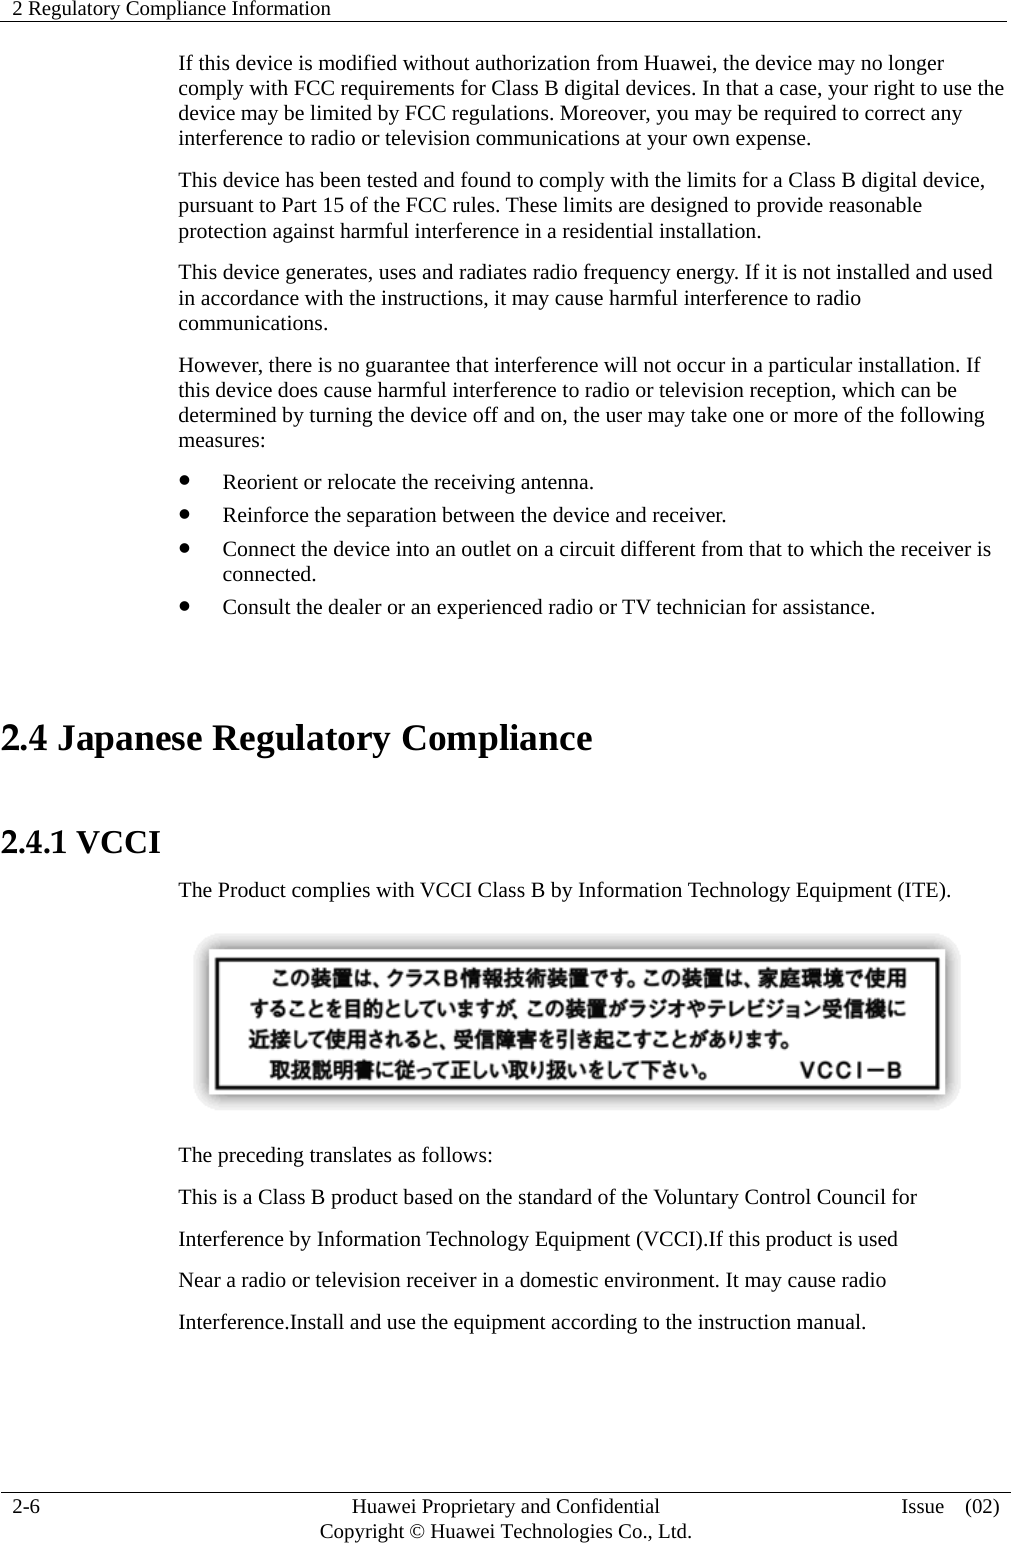 2 Regulatory Compliance Information     2-6  Huawei Proprietary and Confidential         Copyright © Huawei Technologies Co., Ltd.  Issue  (02)  If this device is modified without authorization from Huawei, the device may no longer comply with FCC requirements for Class B digital devices. In that a case, your right to use the device may be limited by FCC regulations. Moreover, you may be required to correct any interference to radio or television communications at your own expense. This device has been tested and found to comply with the limits for a Class B digital device, pursuant to Part 15 of the FCC rules. These limits are designed to provide reasonable protection against harmful interference in a residential installation. This device generates, uses and radiates radio frequency energy. If it is not installed and used in accordance with the instructions, it may cause harmful interference to radio communications. However, there is no guarantee that interference will not occur in a particular installation. If this device does cause harmful interference to radio or television reception, which can be determined by turning the device off and on, the user may take one or more of the following measures:  Reorient or relocate the receiving antenna.  Reinforce the separation between the device and receiver.  Connect the device into an outlet on a circuit different from that to which the receiver is connected.  Consult the dealer or an experienced radio or TV technician for assistance.  2.4 Japanese Regulatory Compliance  2.4.1 VCCI The Product complies with VCCI Class B by Information Technology Equipment (ITE).  The preceding translates as follows: This is a Class B product based on the standard of the Voluntary Control Council for Interference by Information Technology Equipment (VCCI).If this product is used Near a radio or television receiver in a domestic environment. It may cause radio Interference.Install and use the equipment according to the instruction manual.   